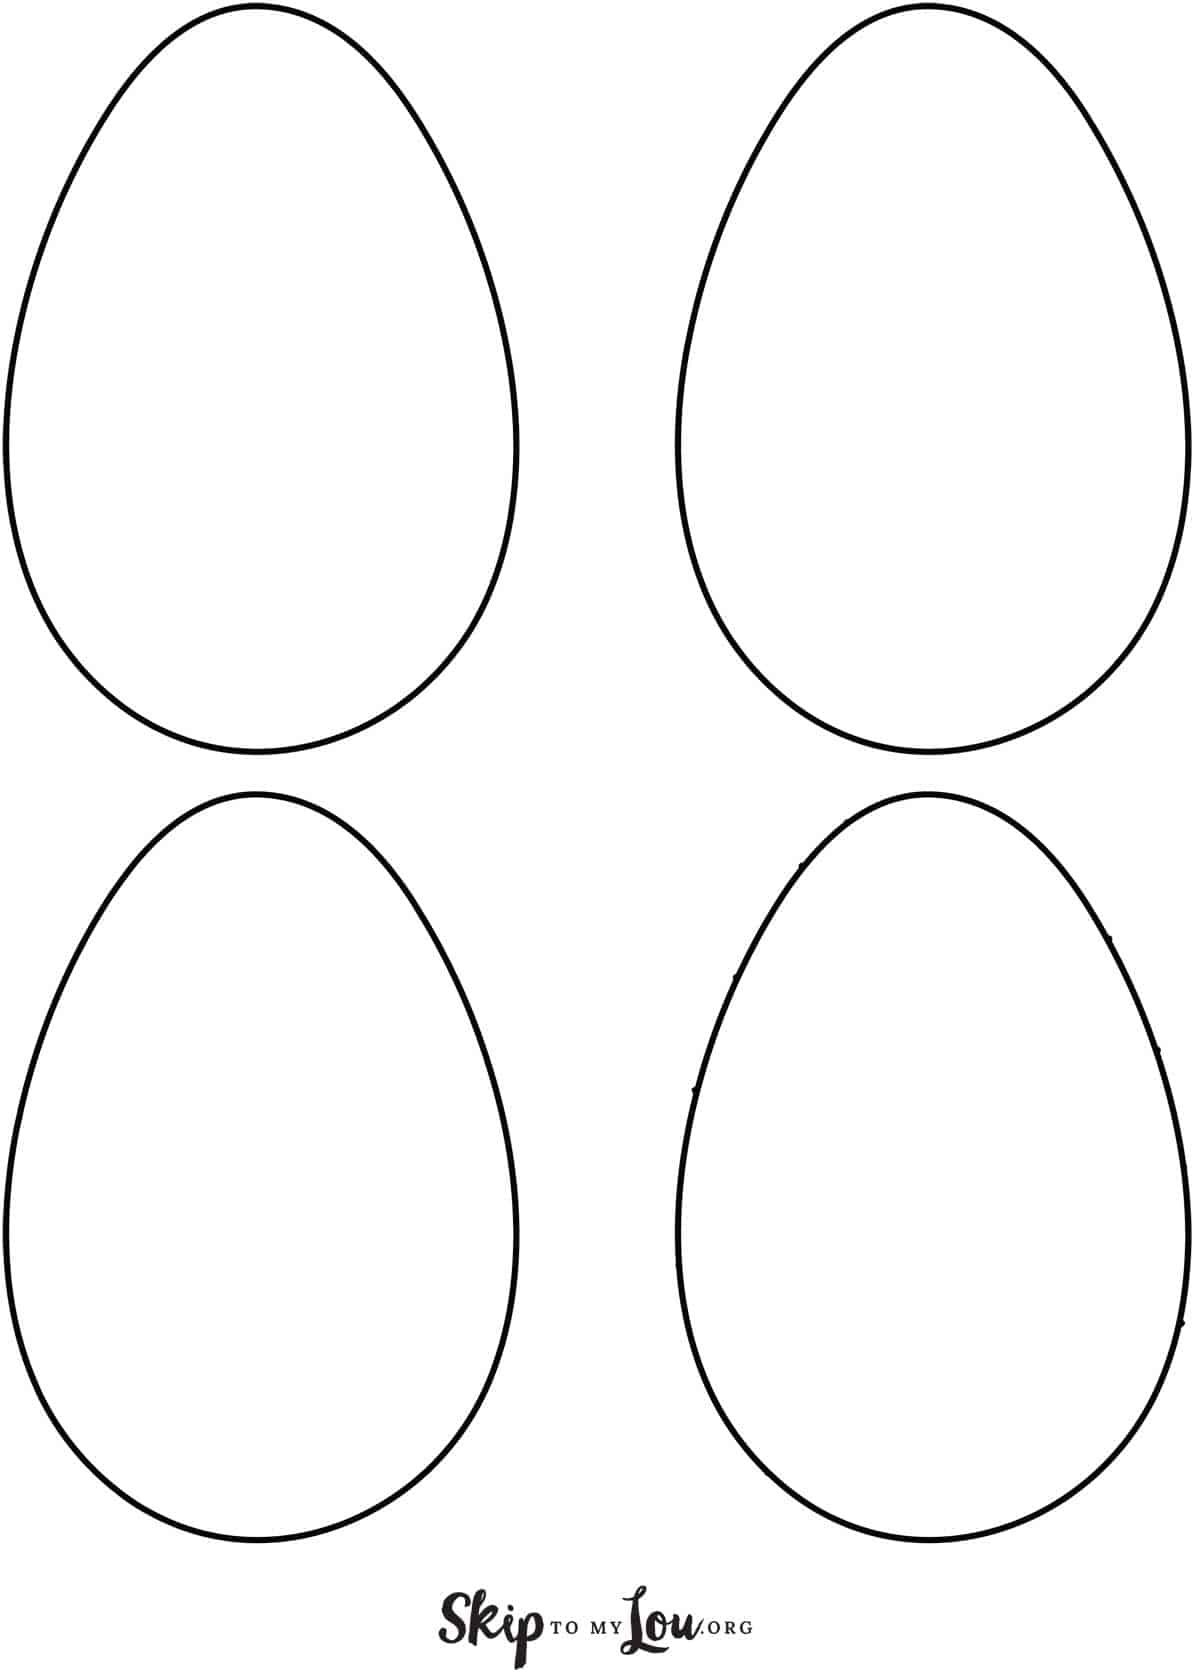 Easter Egg Templates for FUN Easter Crafts Skip To My Lou